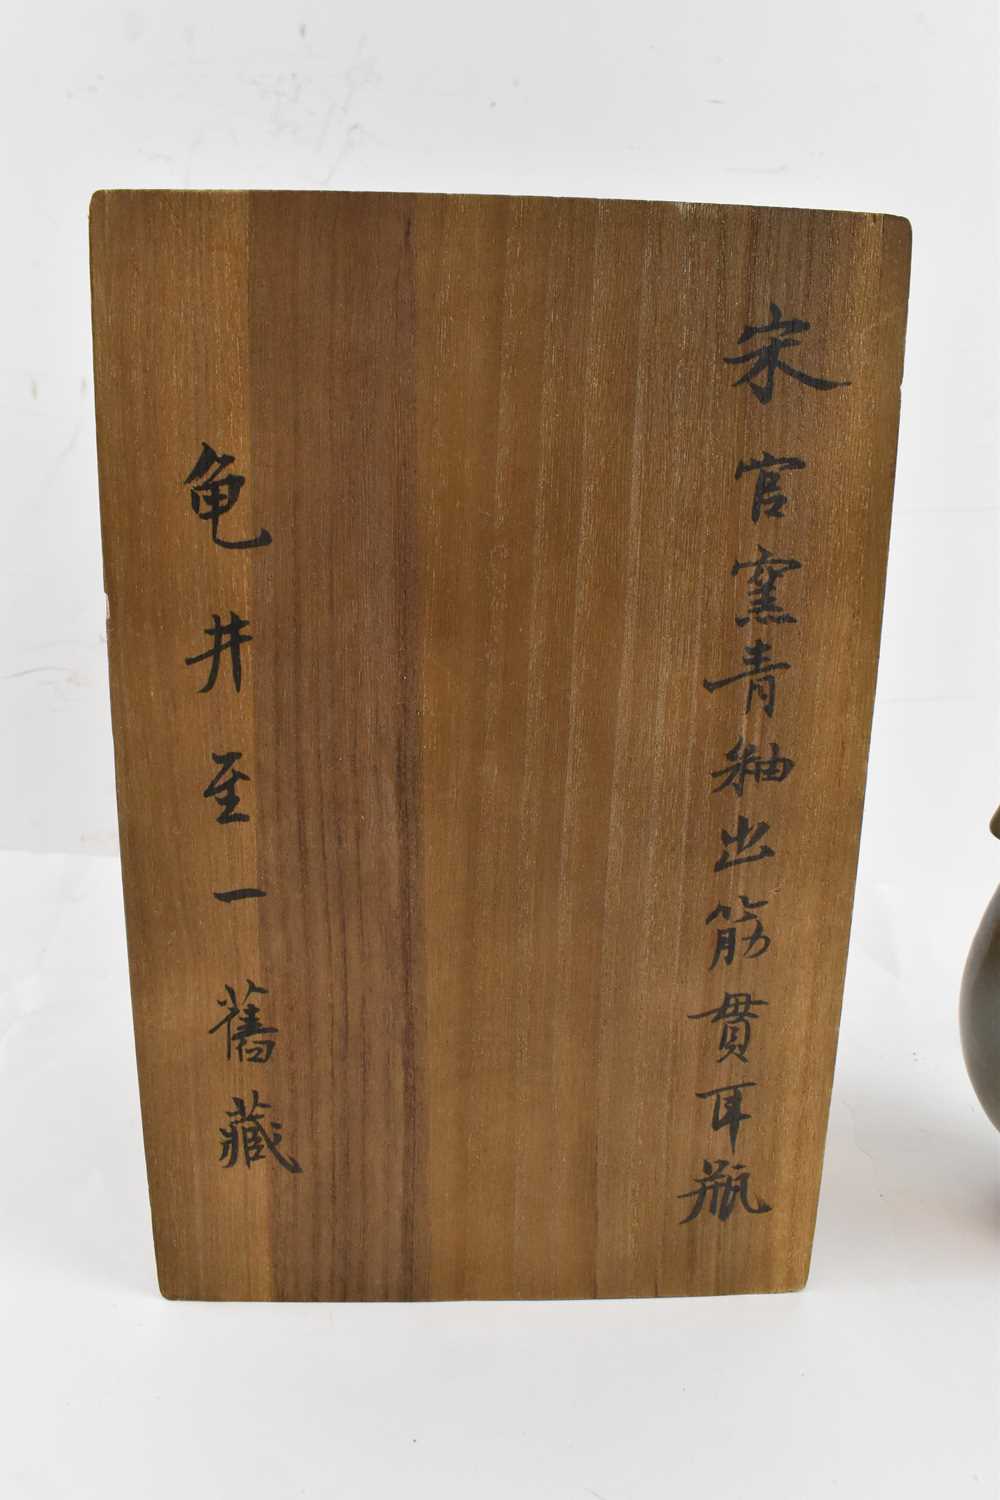 A Chinese celadon glazed Guan type vase, height 18cm, contained in wooden case. - Image 5 of 5